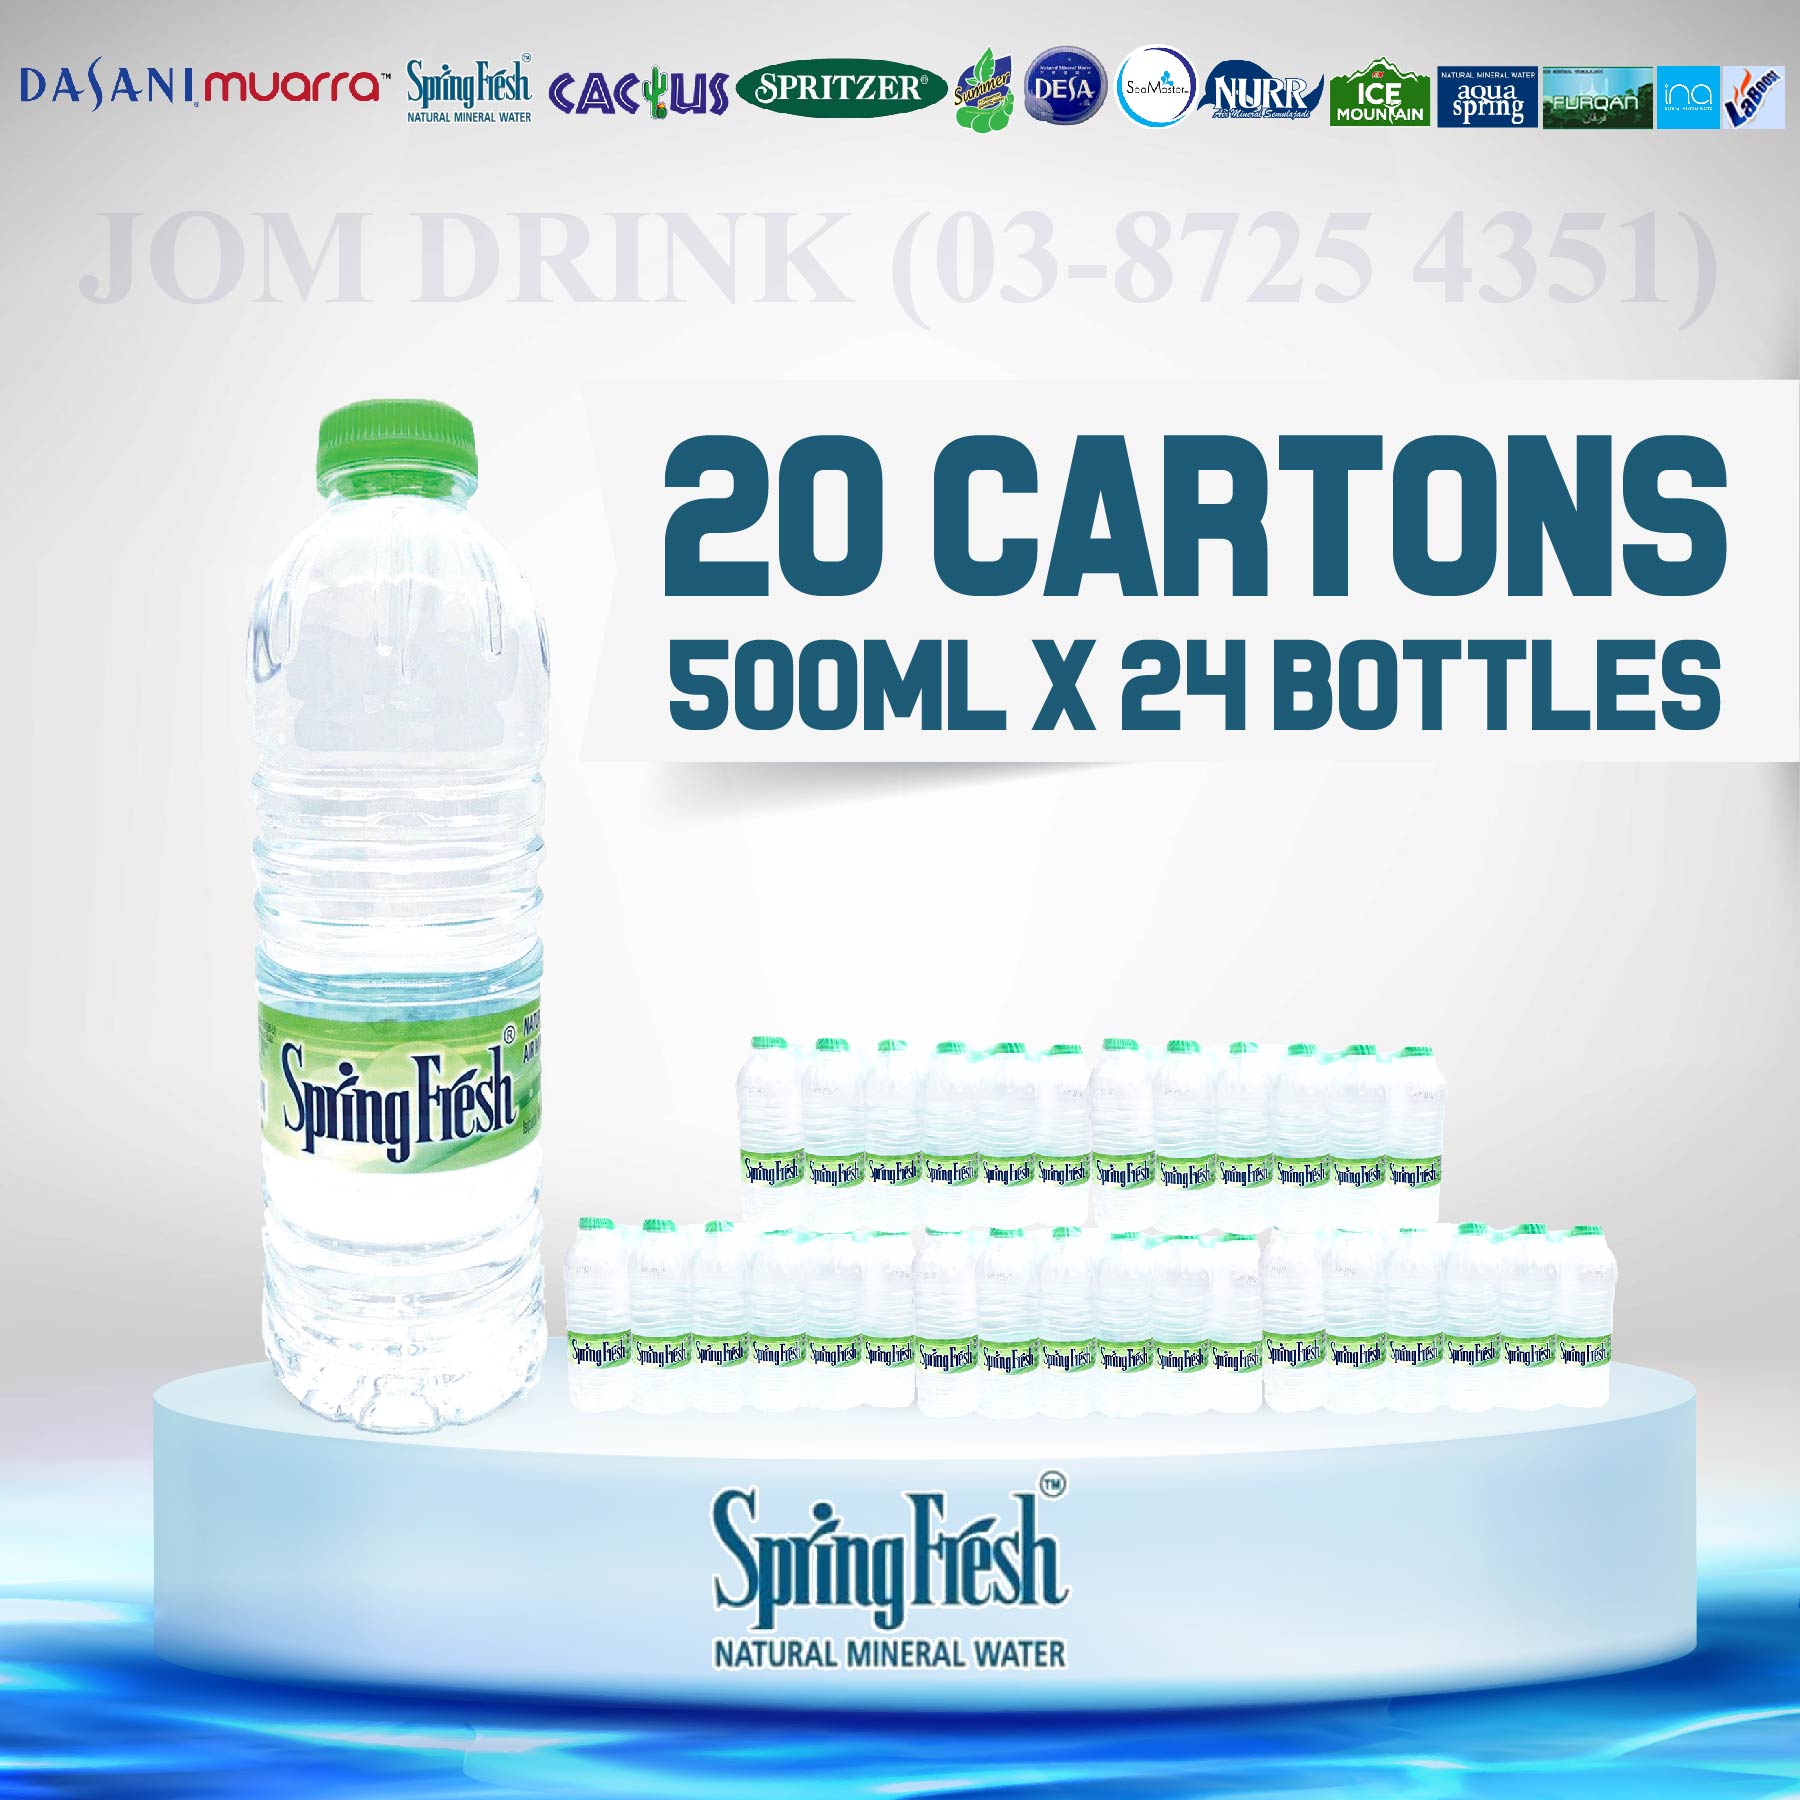 PACKAGES OF 20 BOXES : SPRINGFRESH MINERAL WATER 500ML